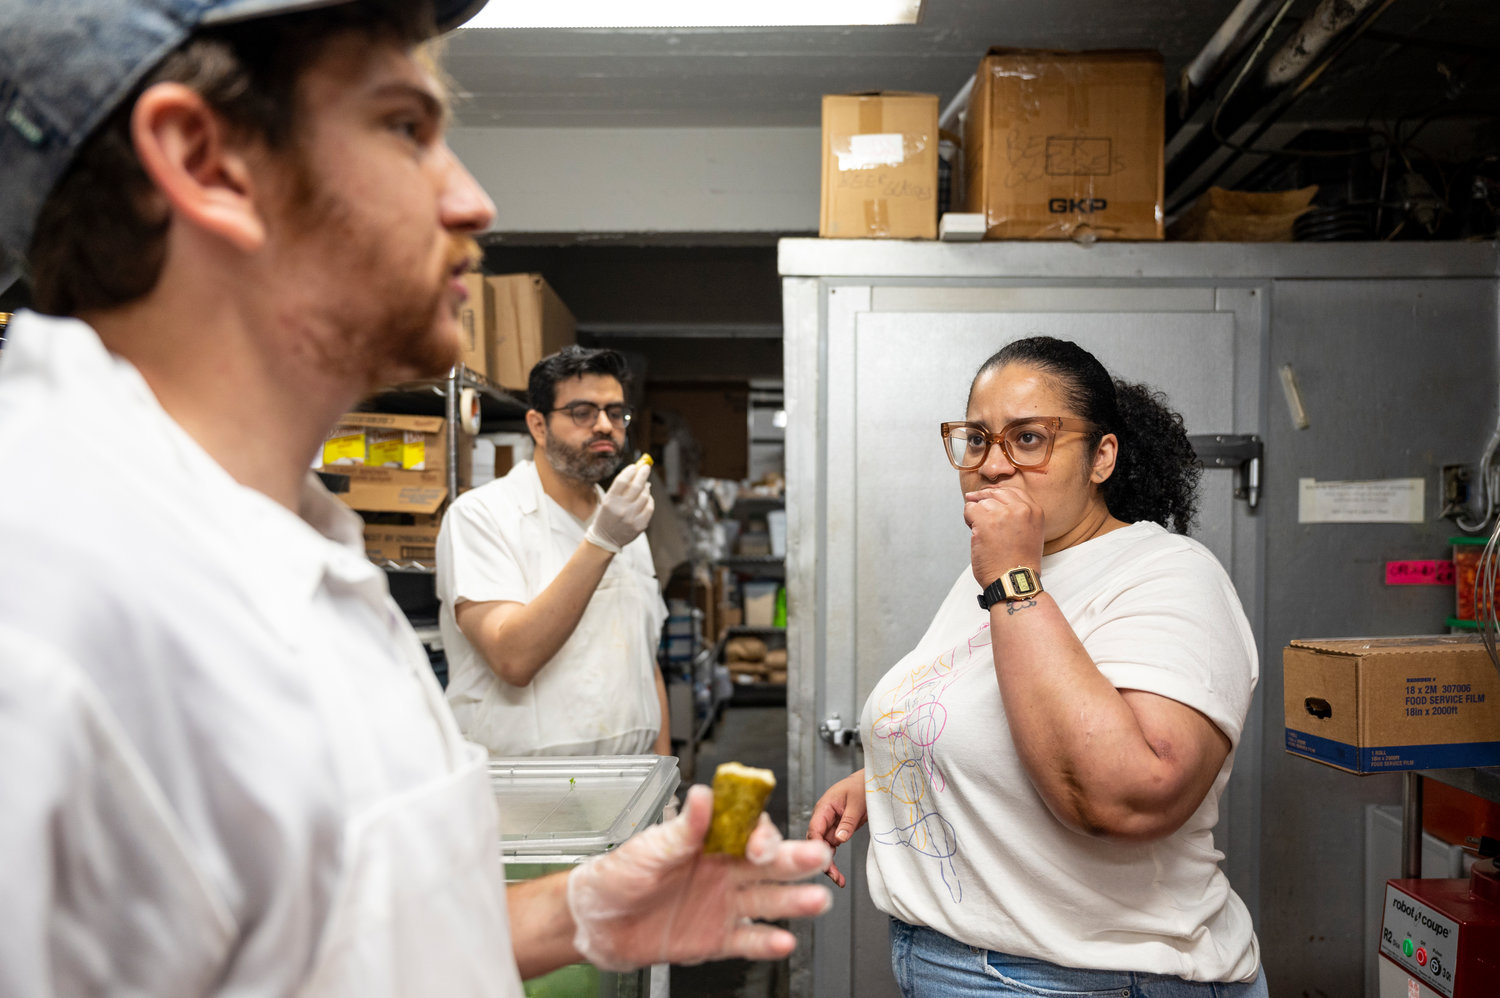 Preparing meals for its postpartum meal sponsorship as well as the Moms Feed the Bronx organization, Moss Café on Johnson Avenue has taken steps to become more grounded in its community.